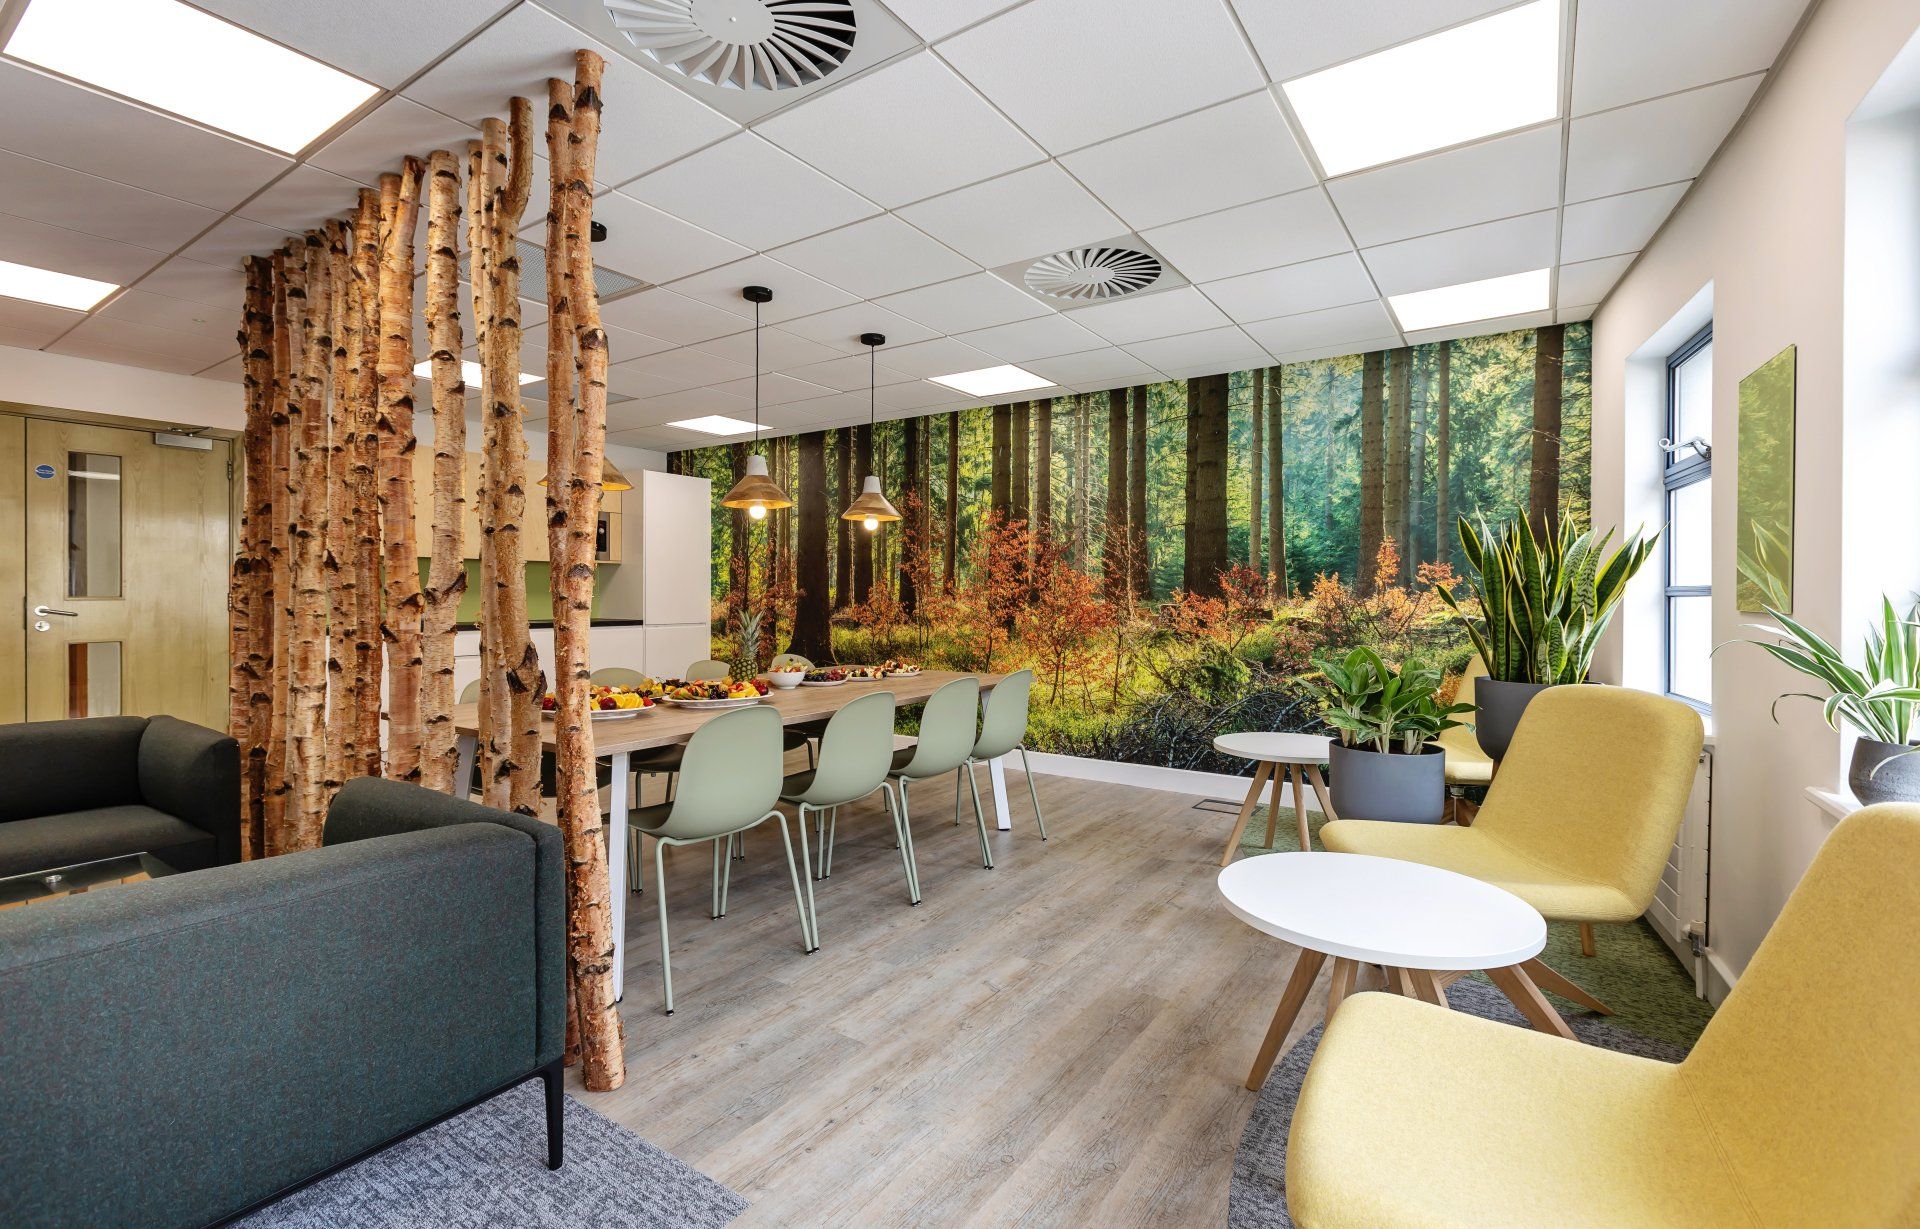 Breakout space with biophilic partition & feature wall by Glenside